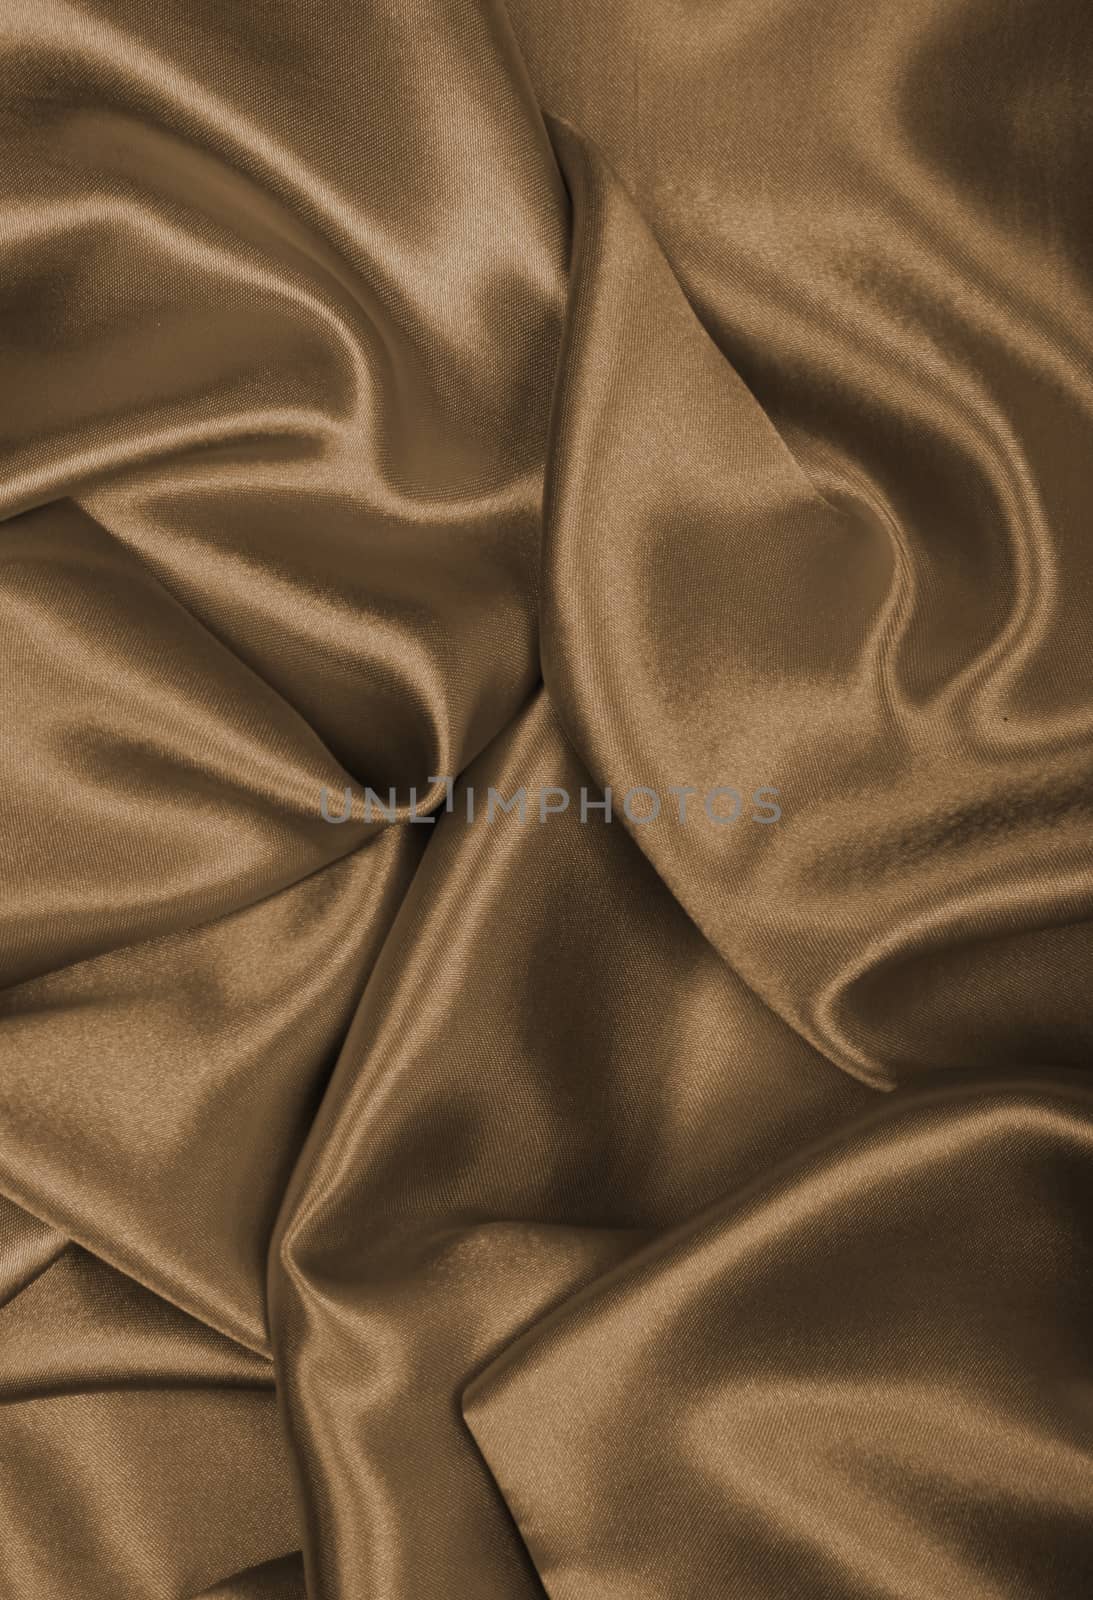 Smooth elegant golden silk or satin can use as background. In Sepia toned. Retro style